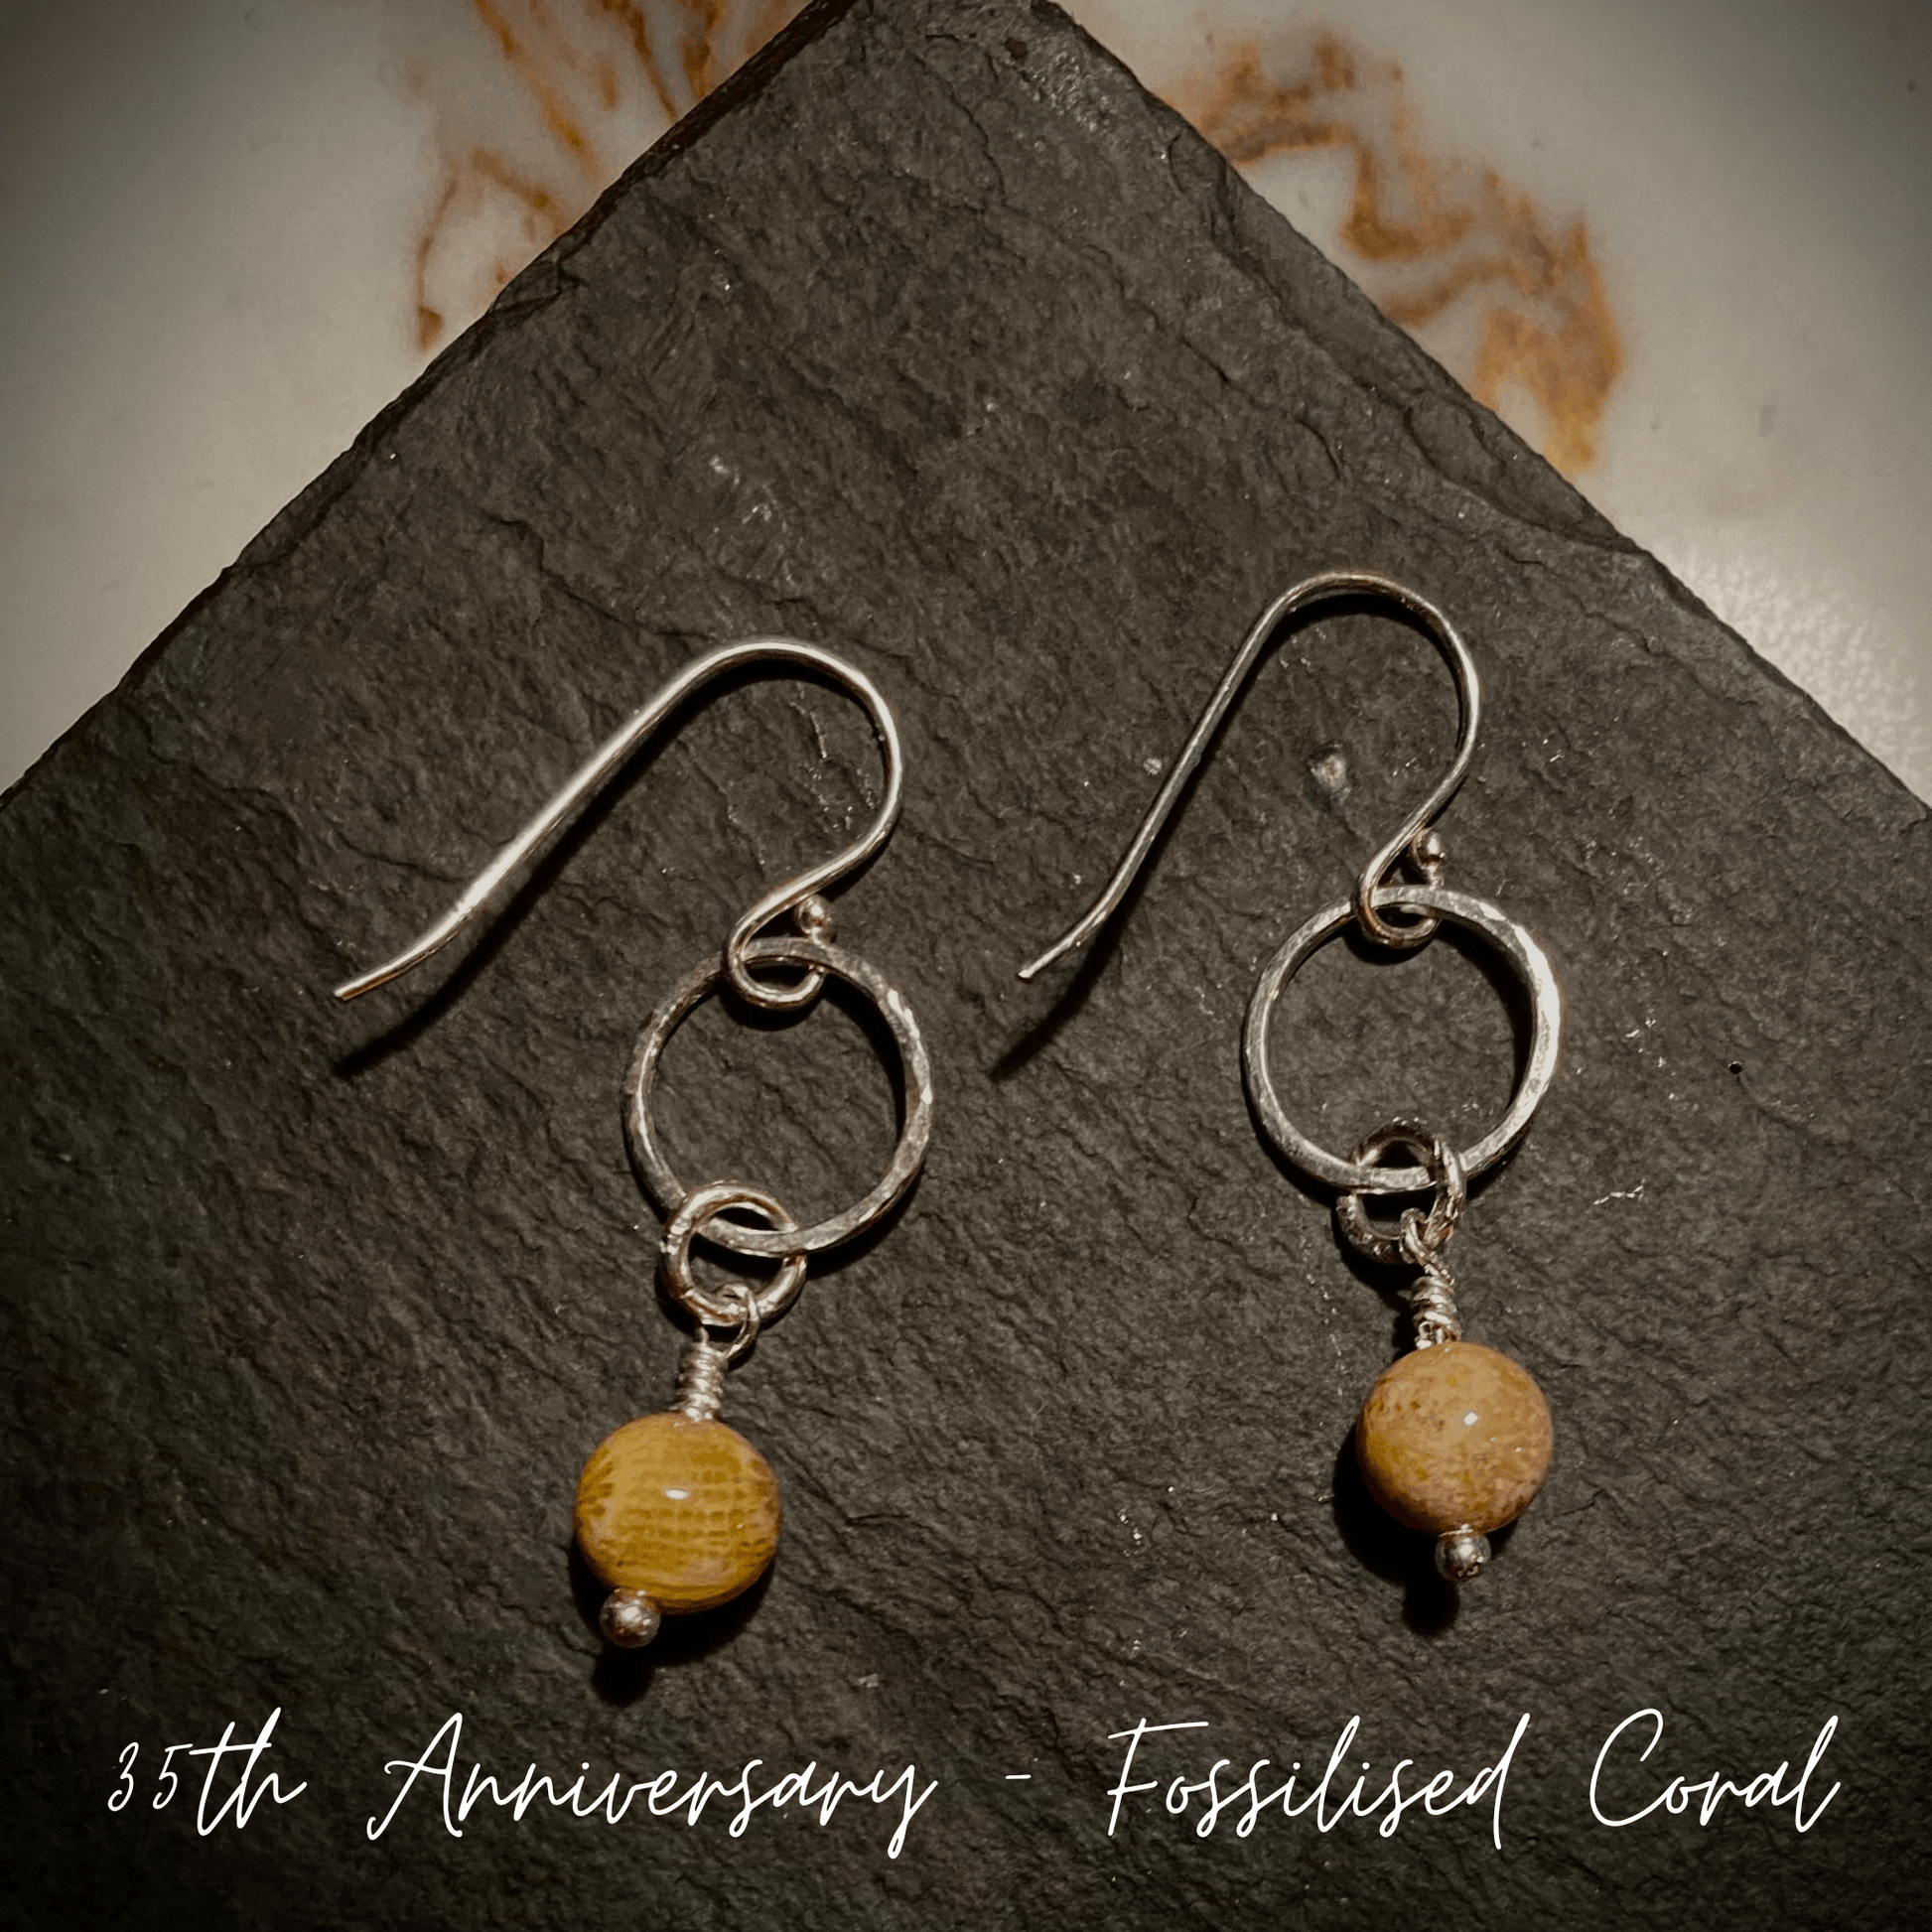 35th Anniversary Earrings | Fossilised Coral | Sterling silver | 35th wedding anniversary gift - RACHEL SHRIEVES DESIGN